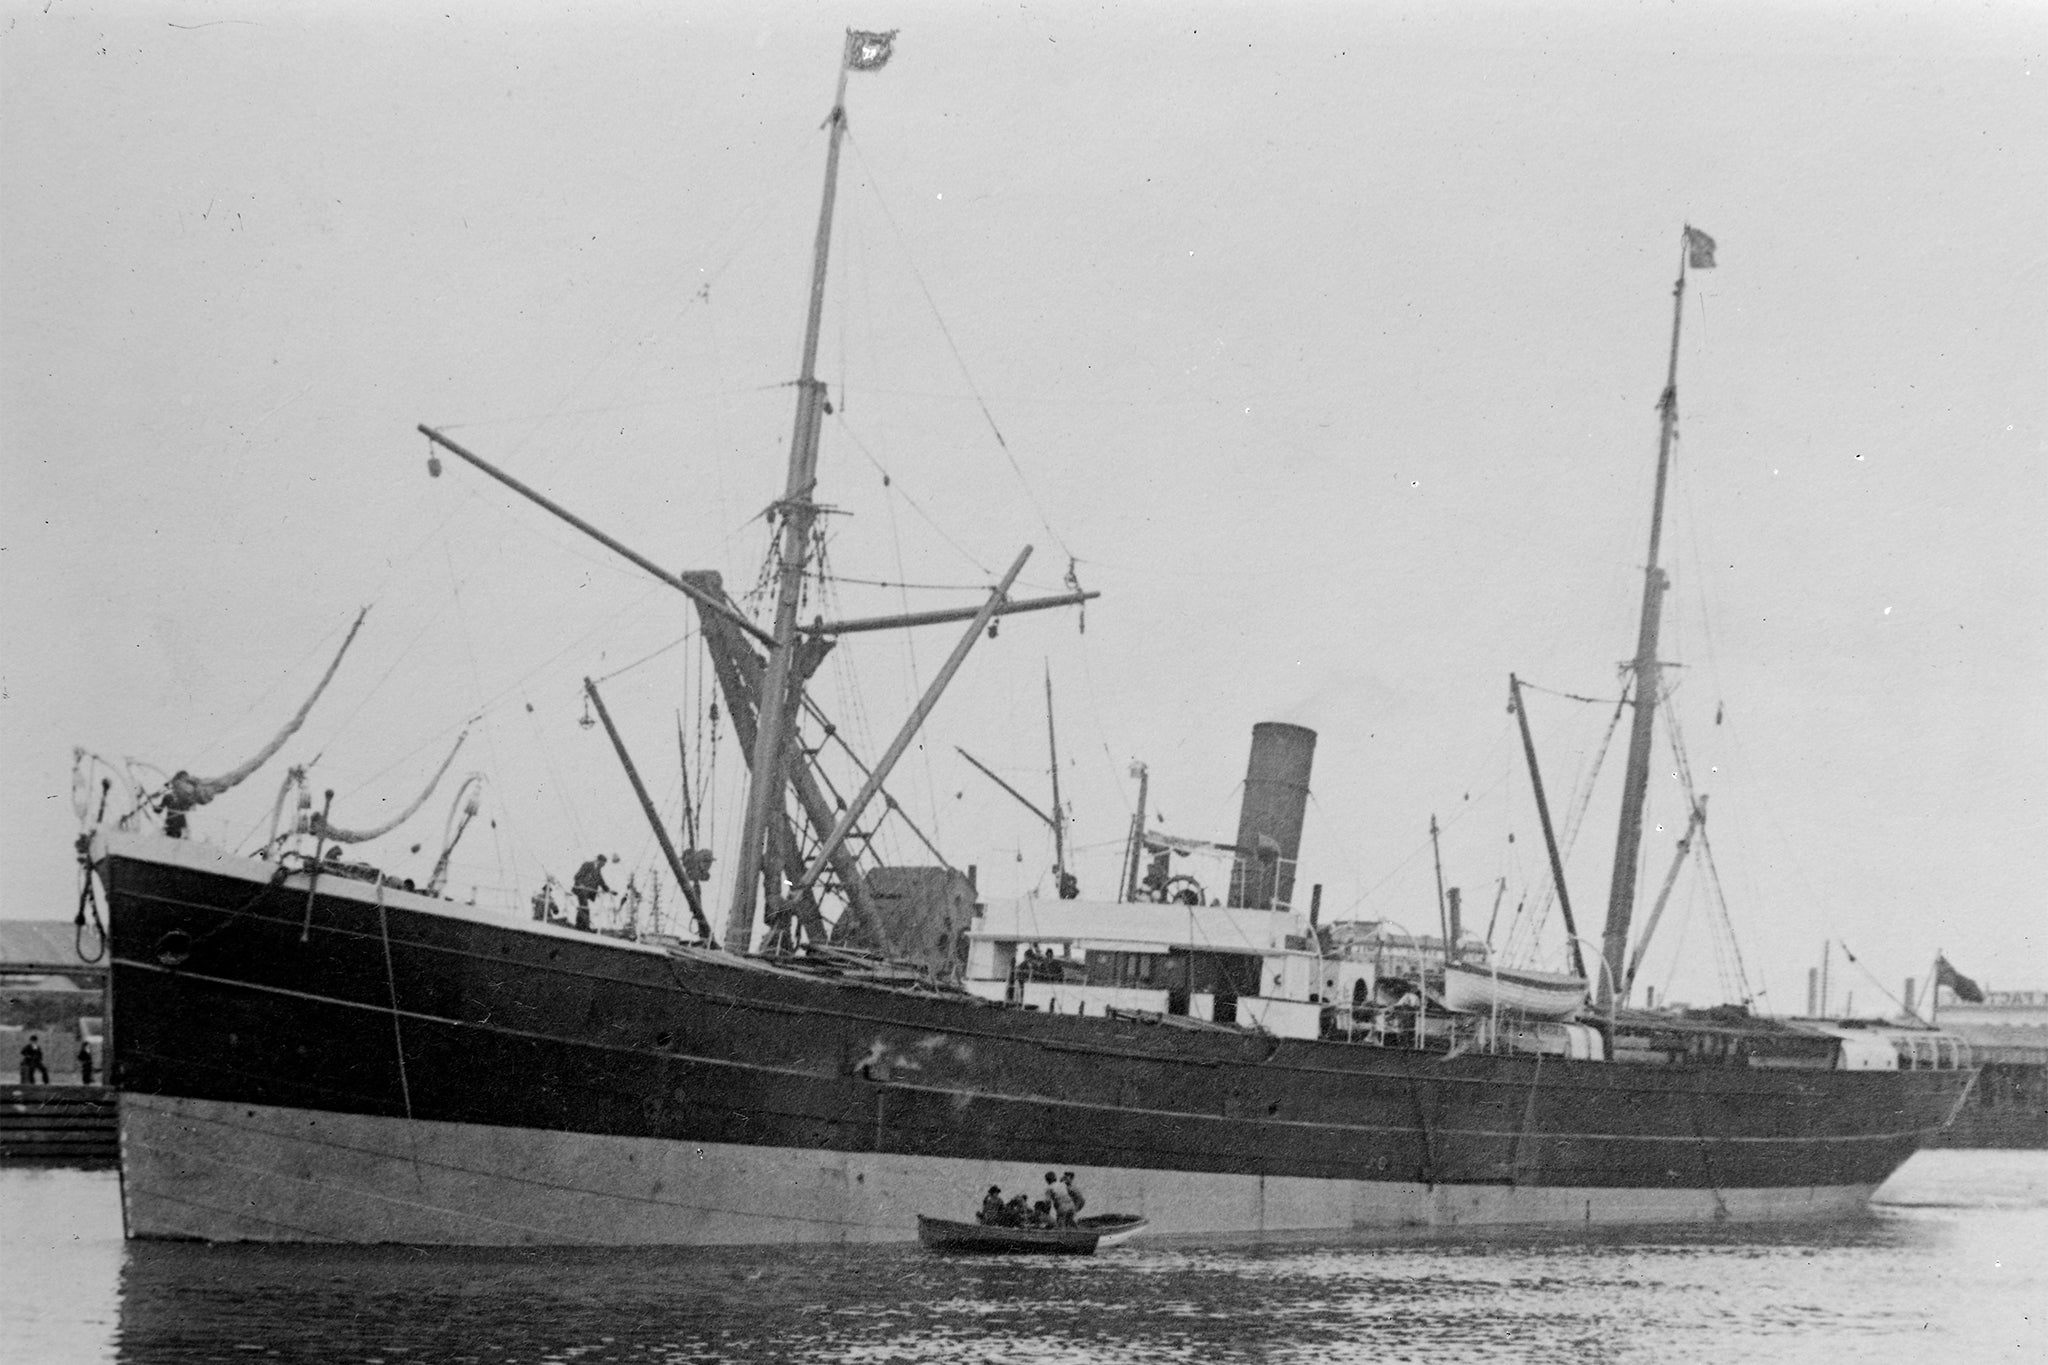 An investigation has helped identify the wreck of a steamship that disappeared off Australia’s east coast in 1904